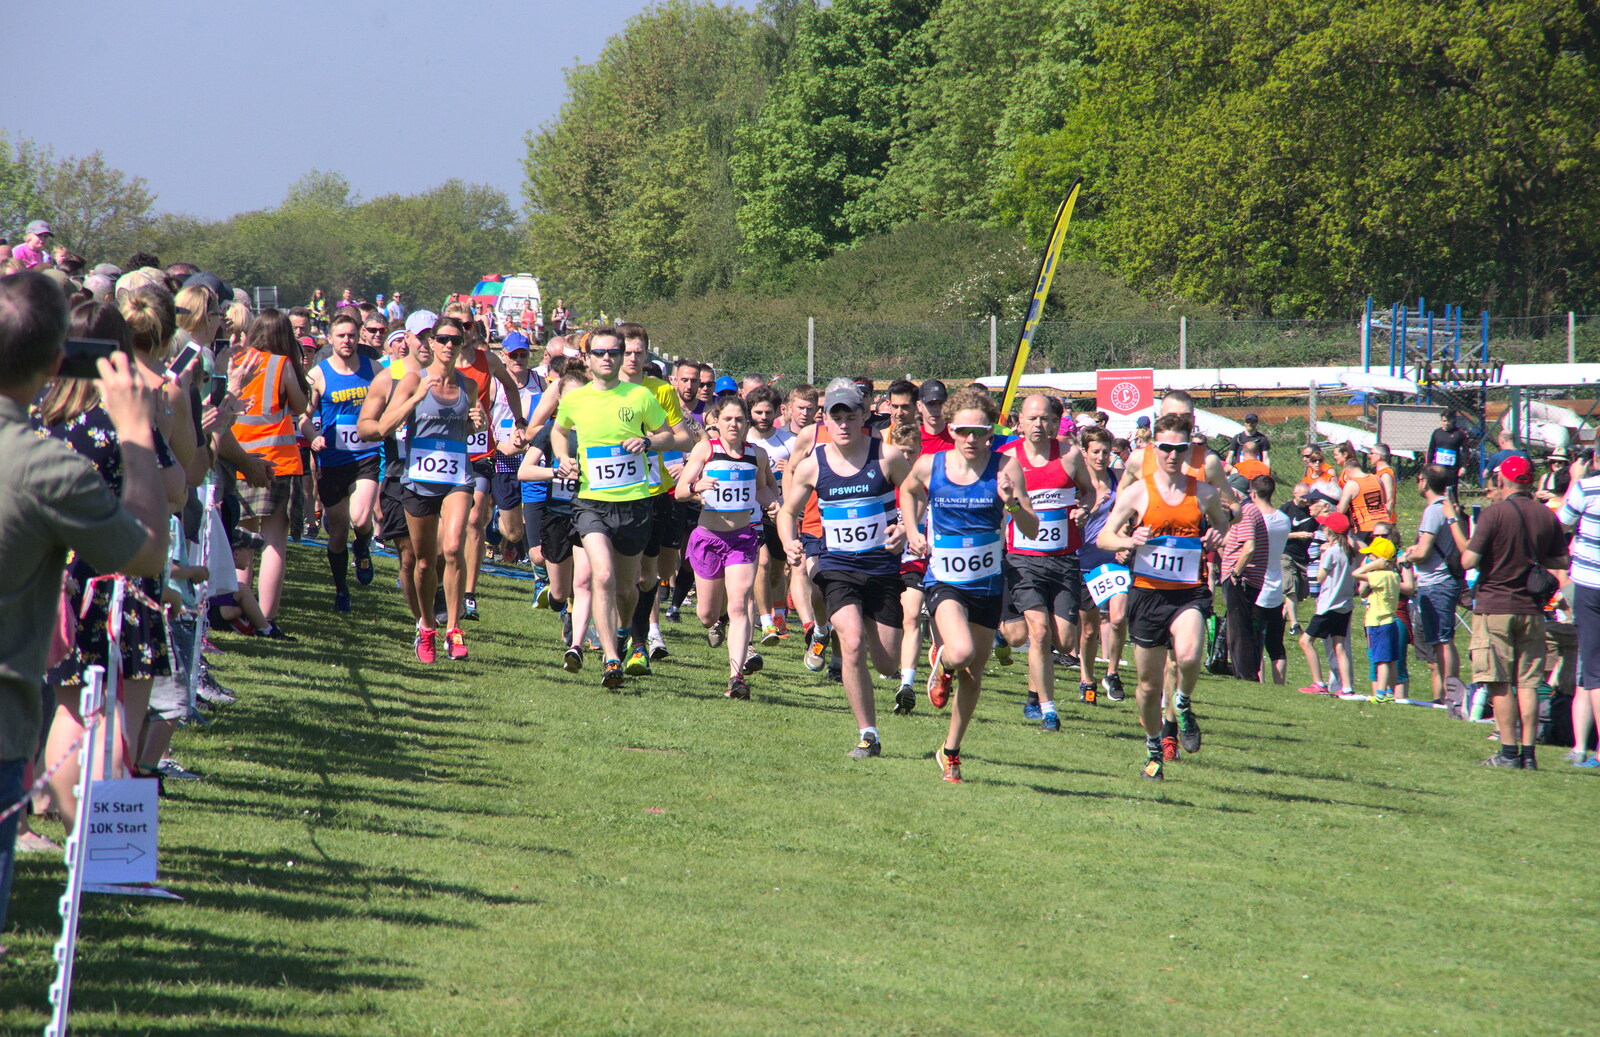 The race kicks off as over 1,300 runners leg it from Isobel's 10km Run, Alton Water, Stutton, Suffolk - 6th May 2018